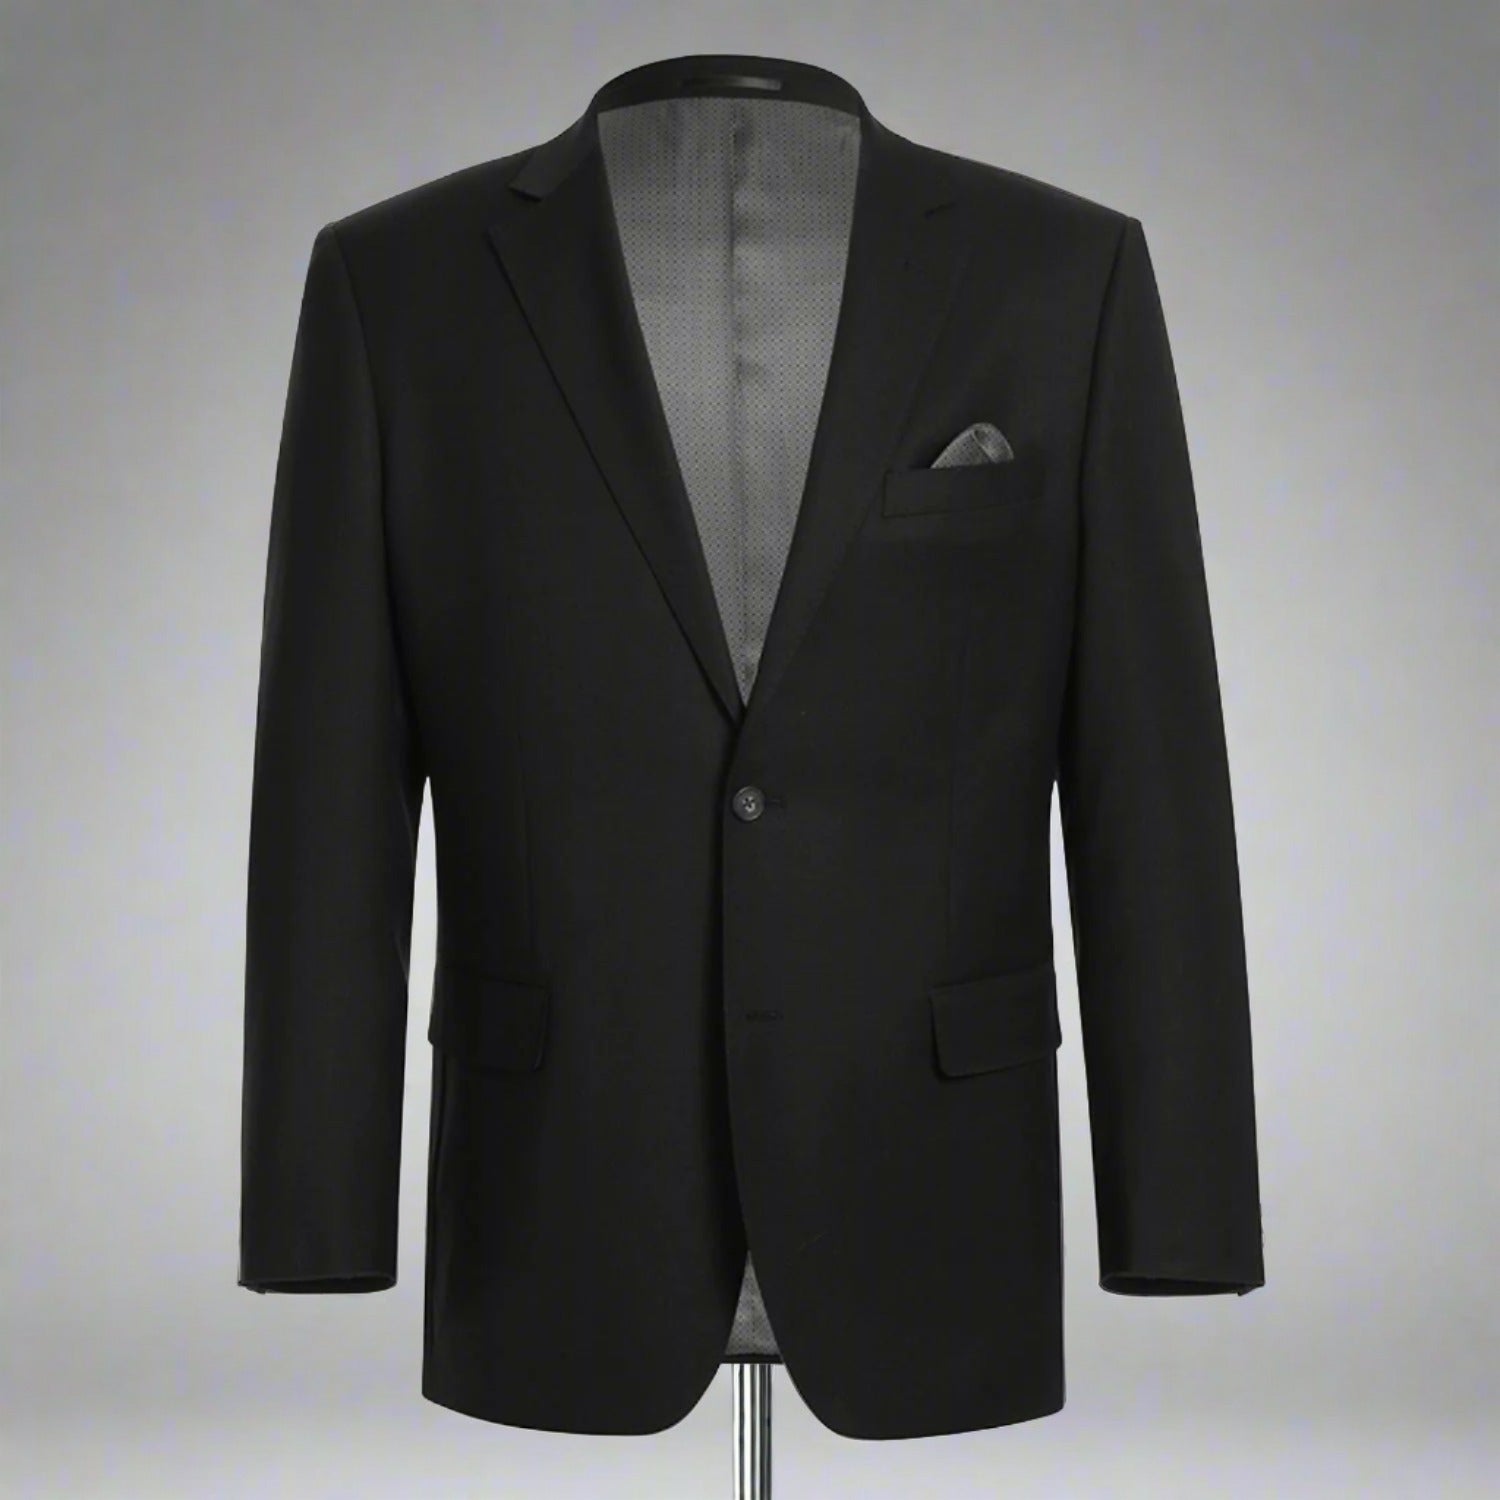 Super 140s Wool Single Breasted Classic Fit Blazer in Black (Short, Regular, and Long Available) by Renoir 48 Regular